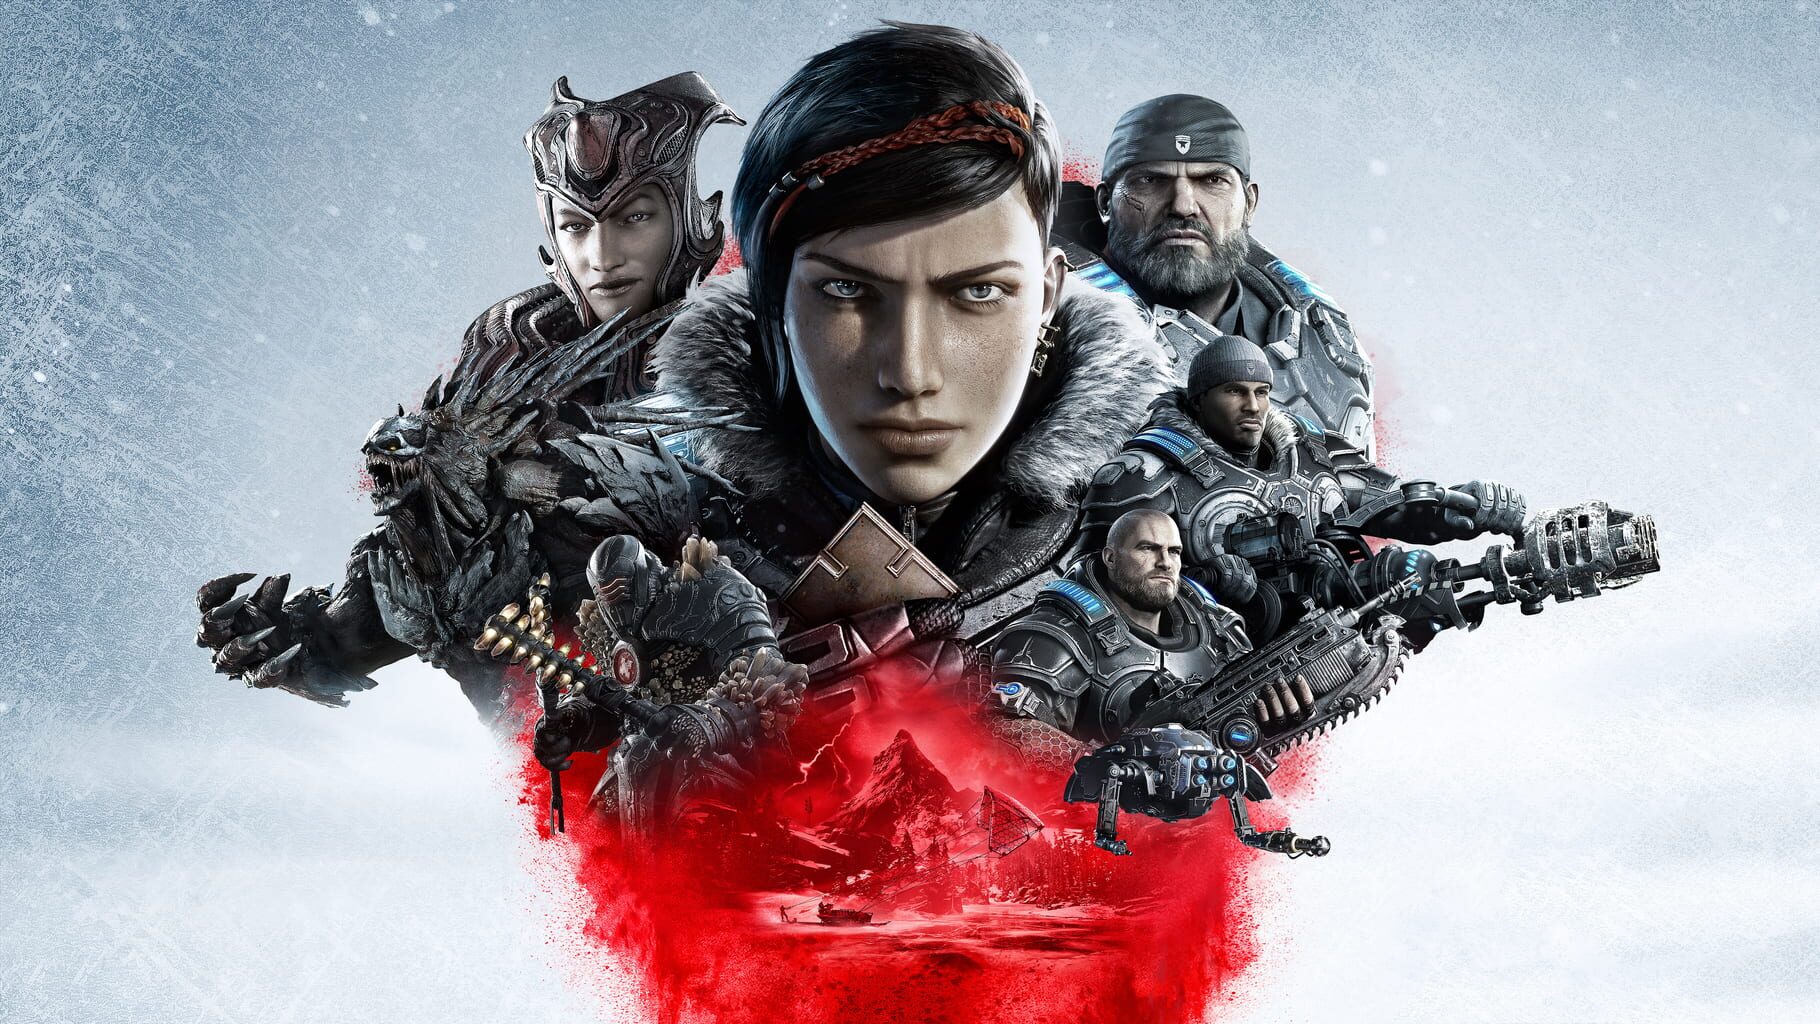 Arte - Gears 5: Game of the Year Edition